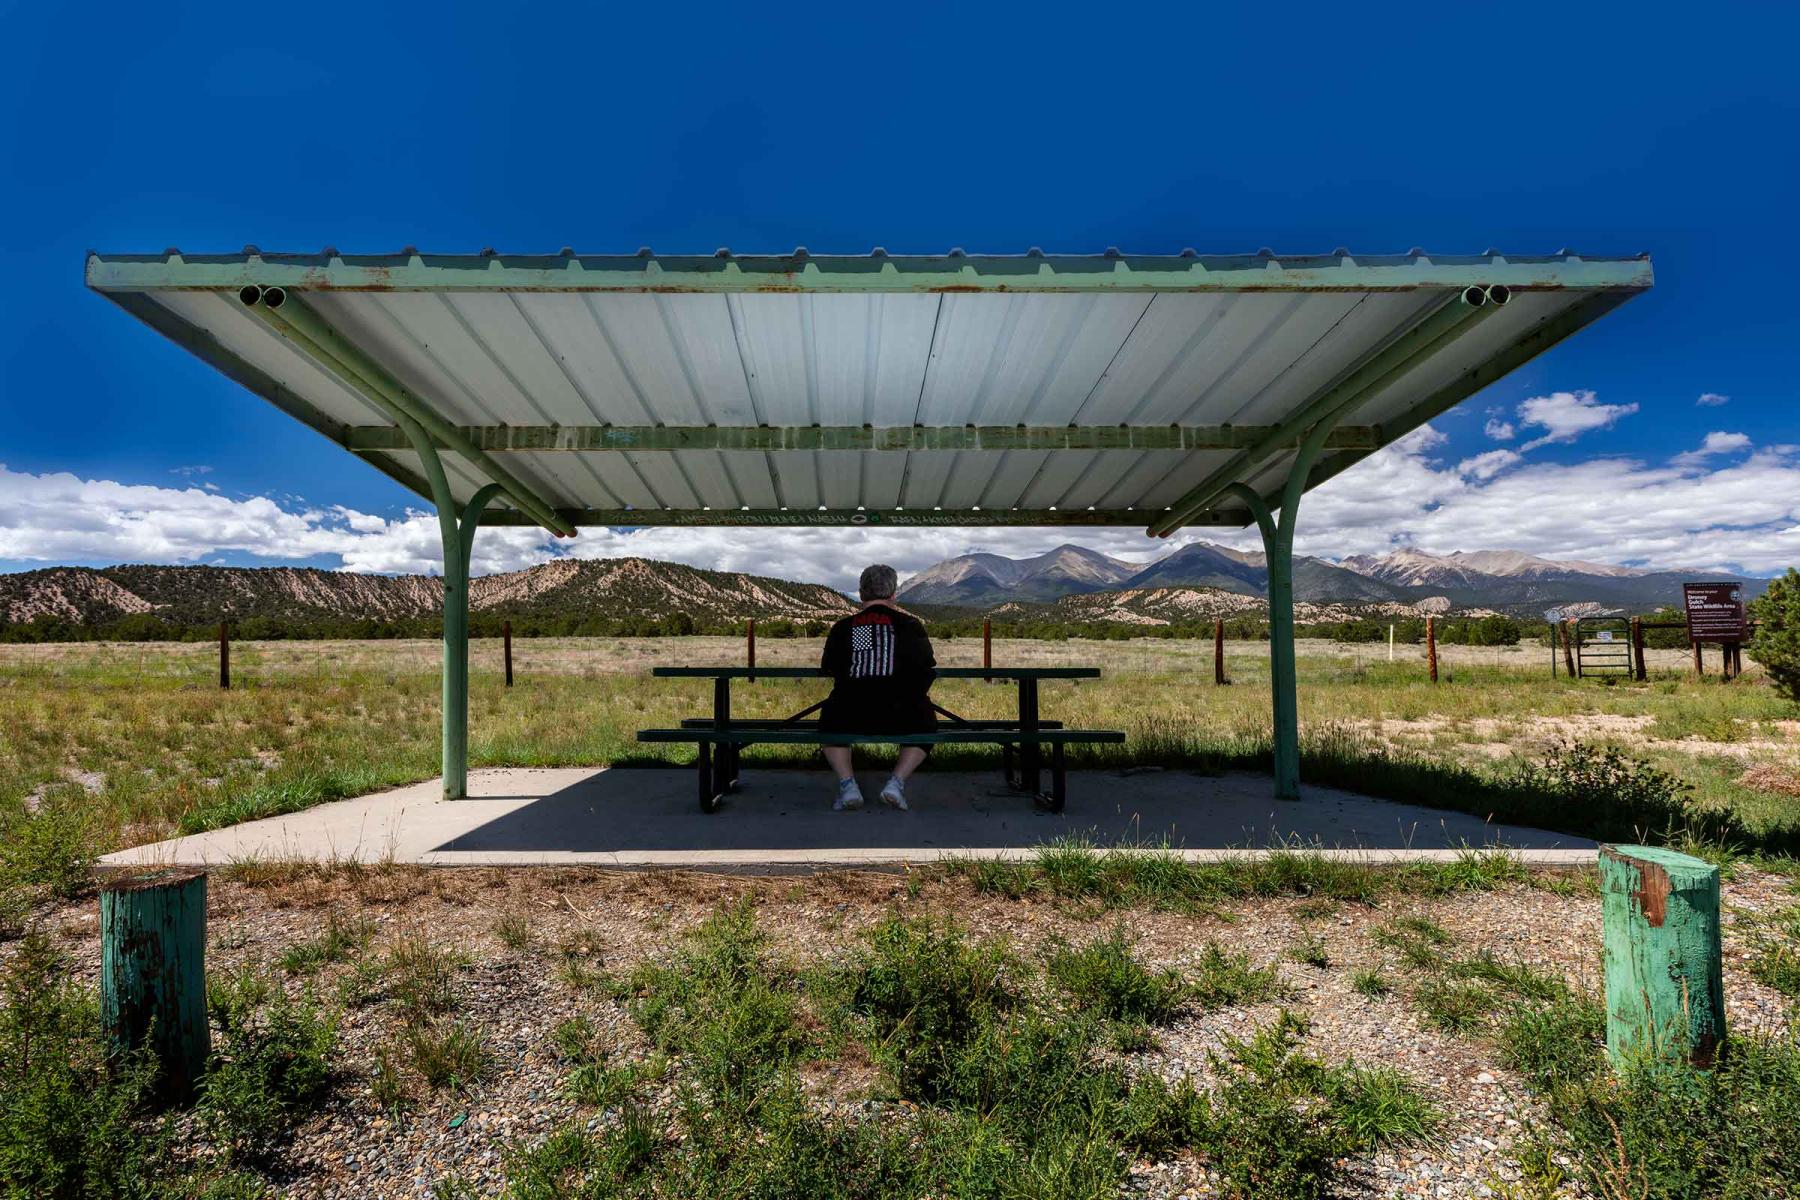 Rest stop on North 285 from southern Colorado to Denver. : Visiting Mom : New York City based photographer and video specializing in portrait corporate portraits, video, editorial stories for on location and architectural photography